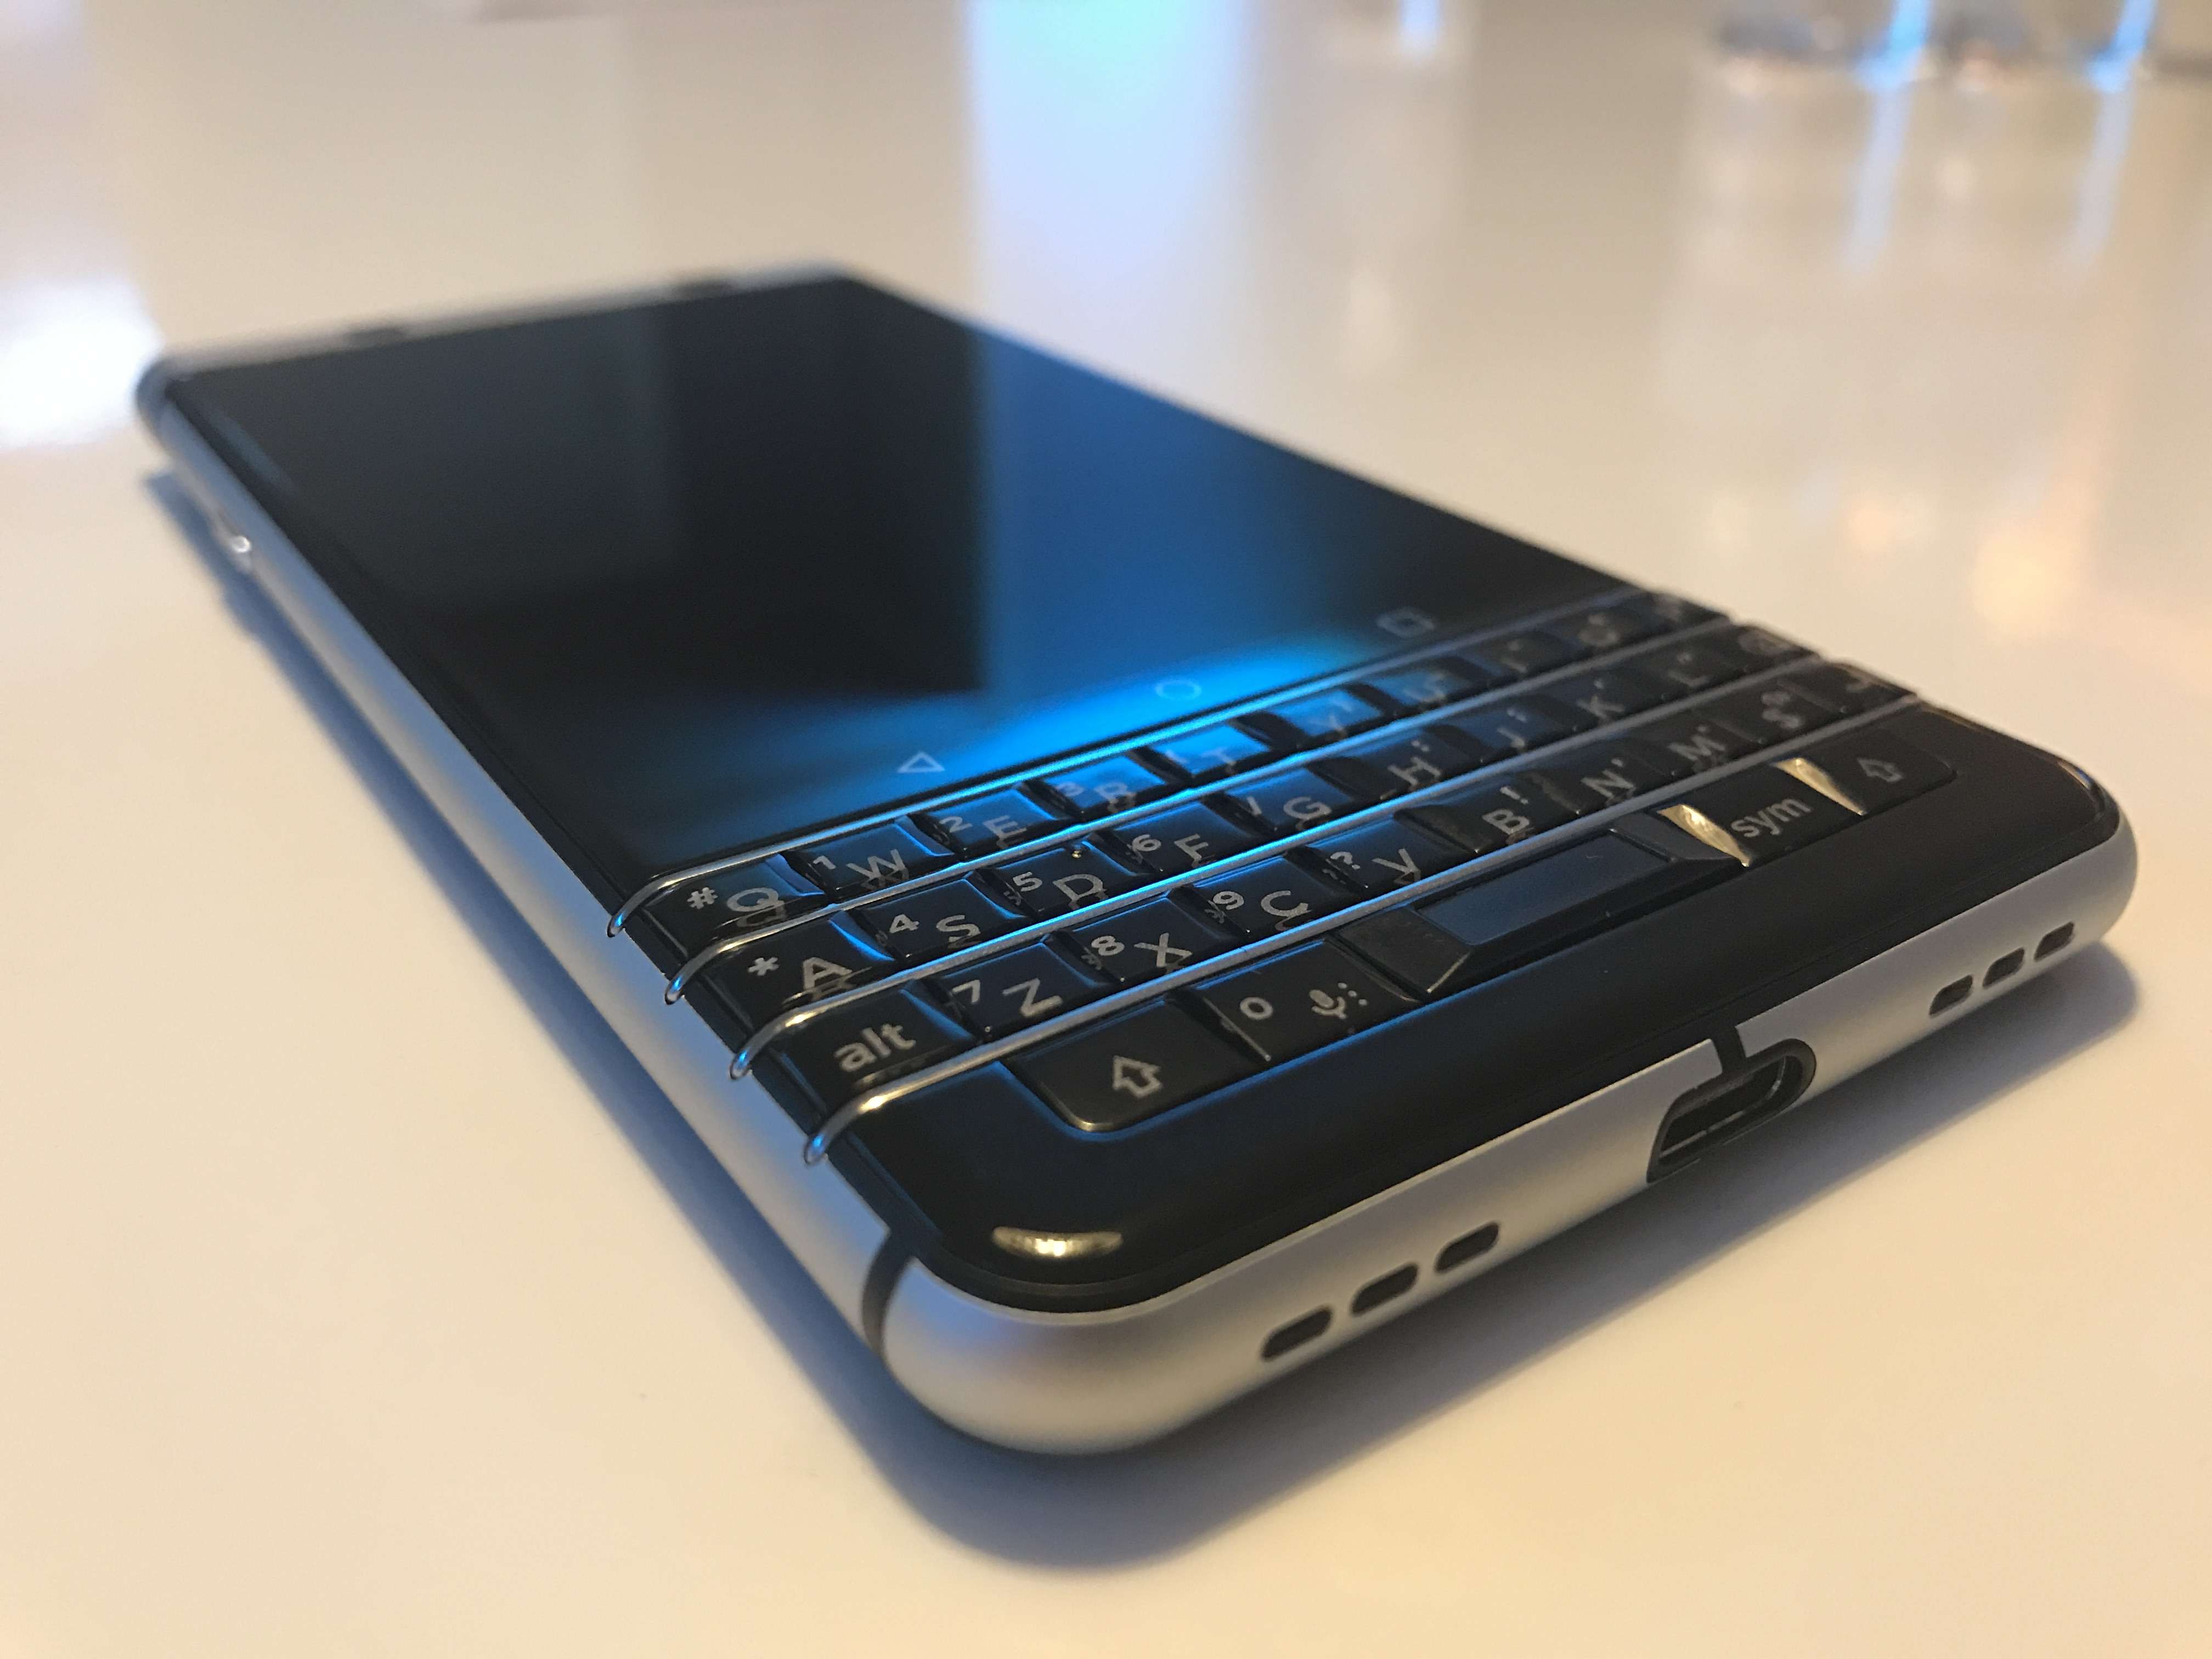 With a QWERTY keyboard that maker TCL’s Nicolas Zibell says is ‘tactile and with some new innovations’, and a leather back, latest BlackBerry Android offering certainly stands out from its metallic-slab smartphone rivals